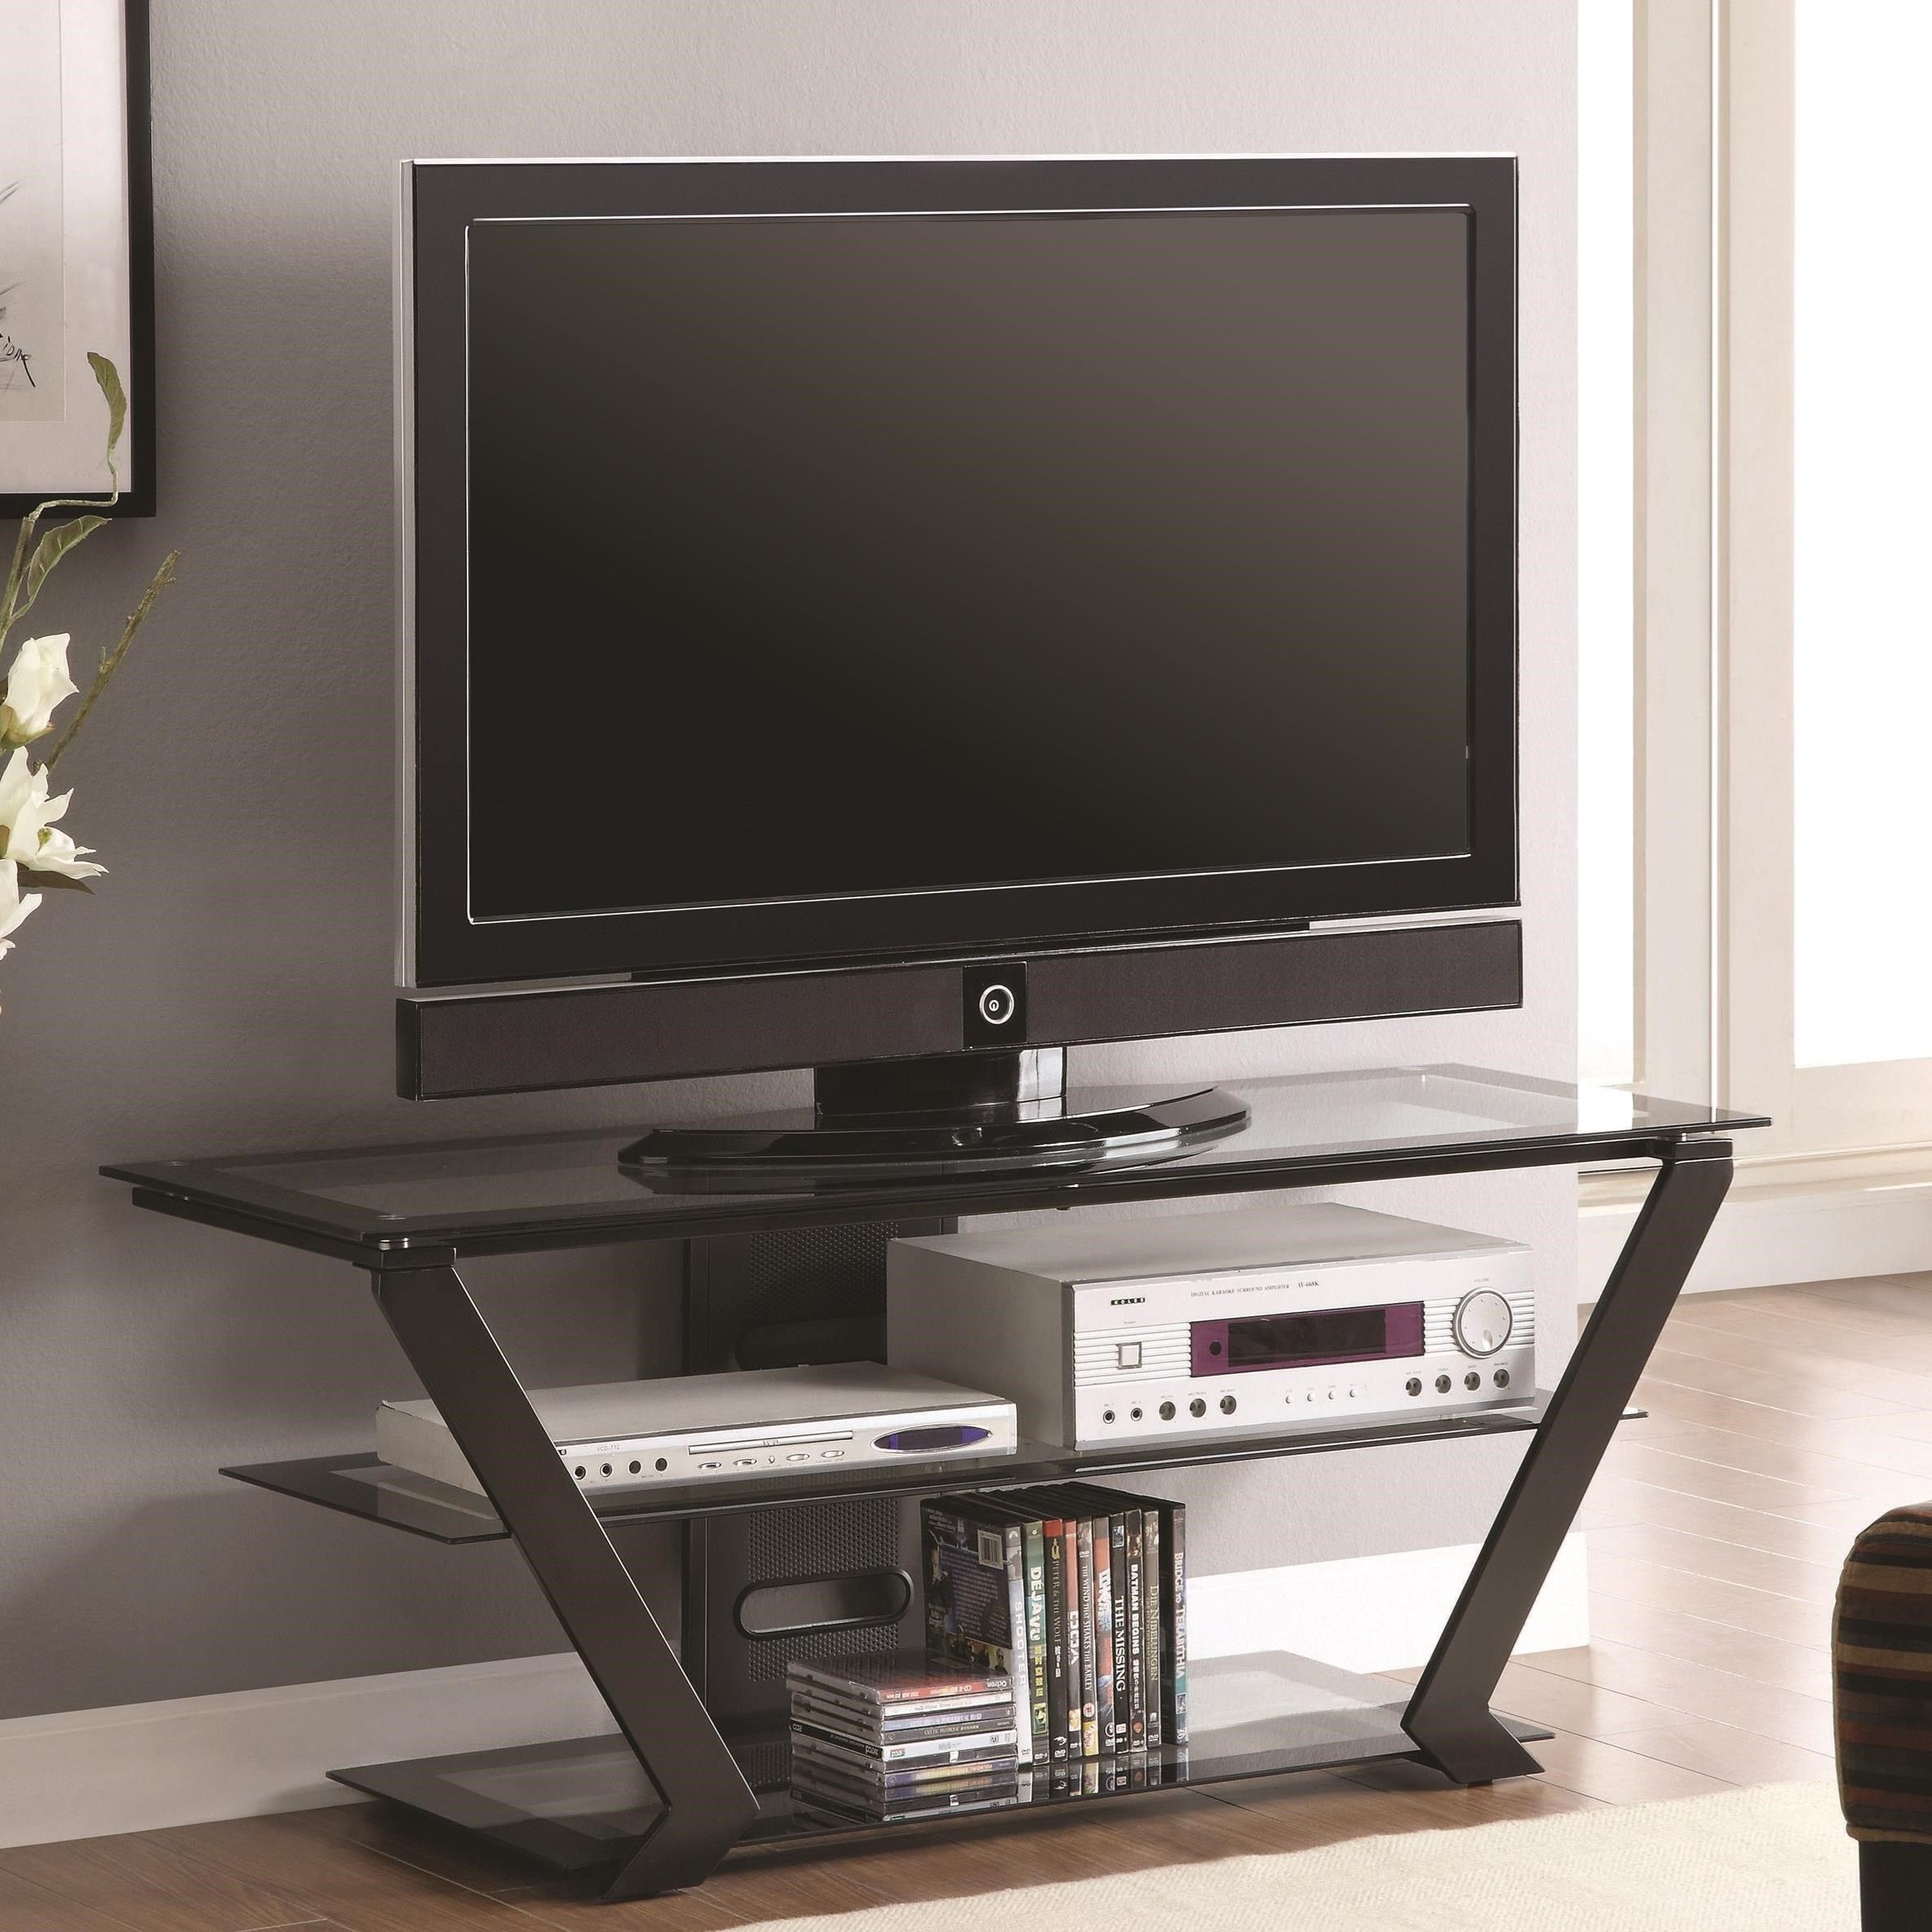 Coaster Tv Stands 701370 Contemporary Tv Stand | Arwood's Furniture For Black Marble Tv Stands (View 16 of 20)